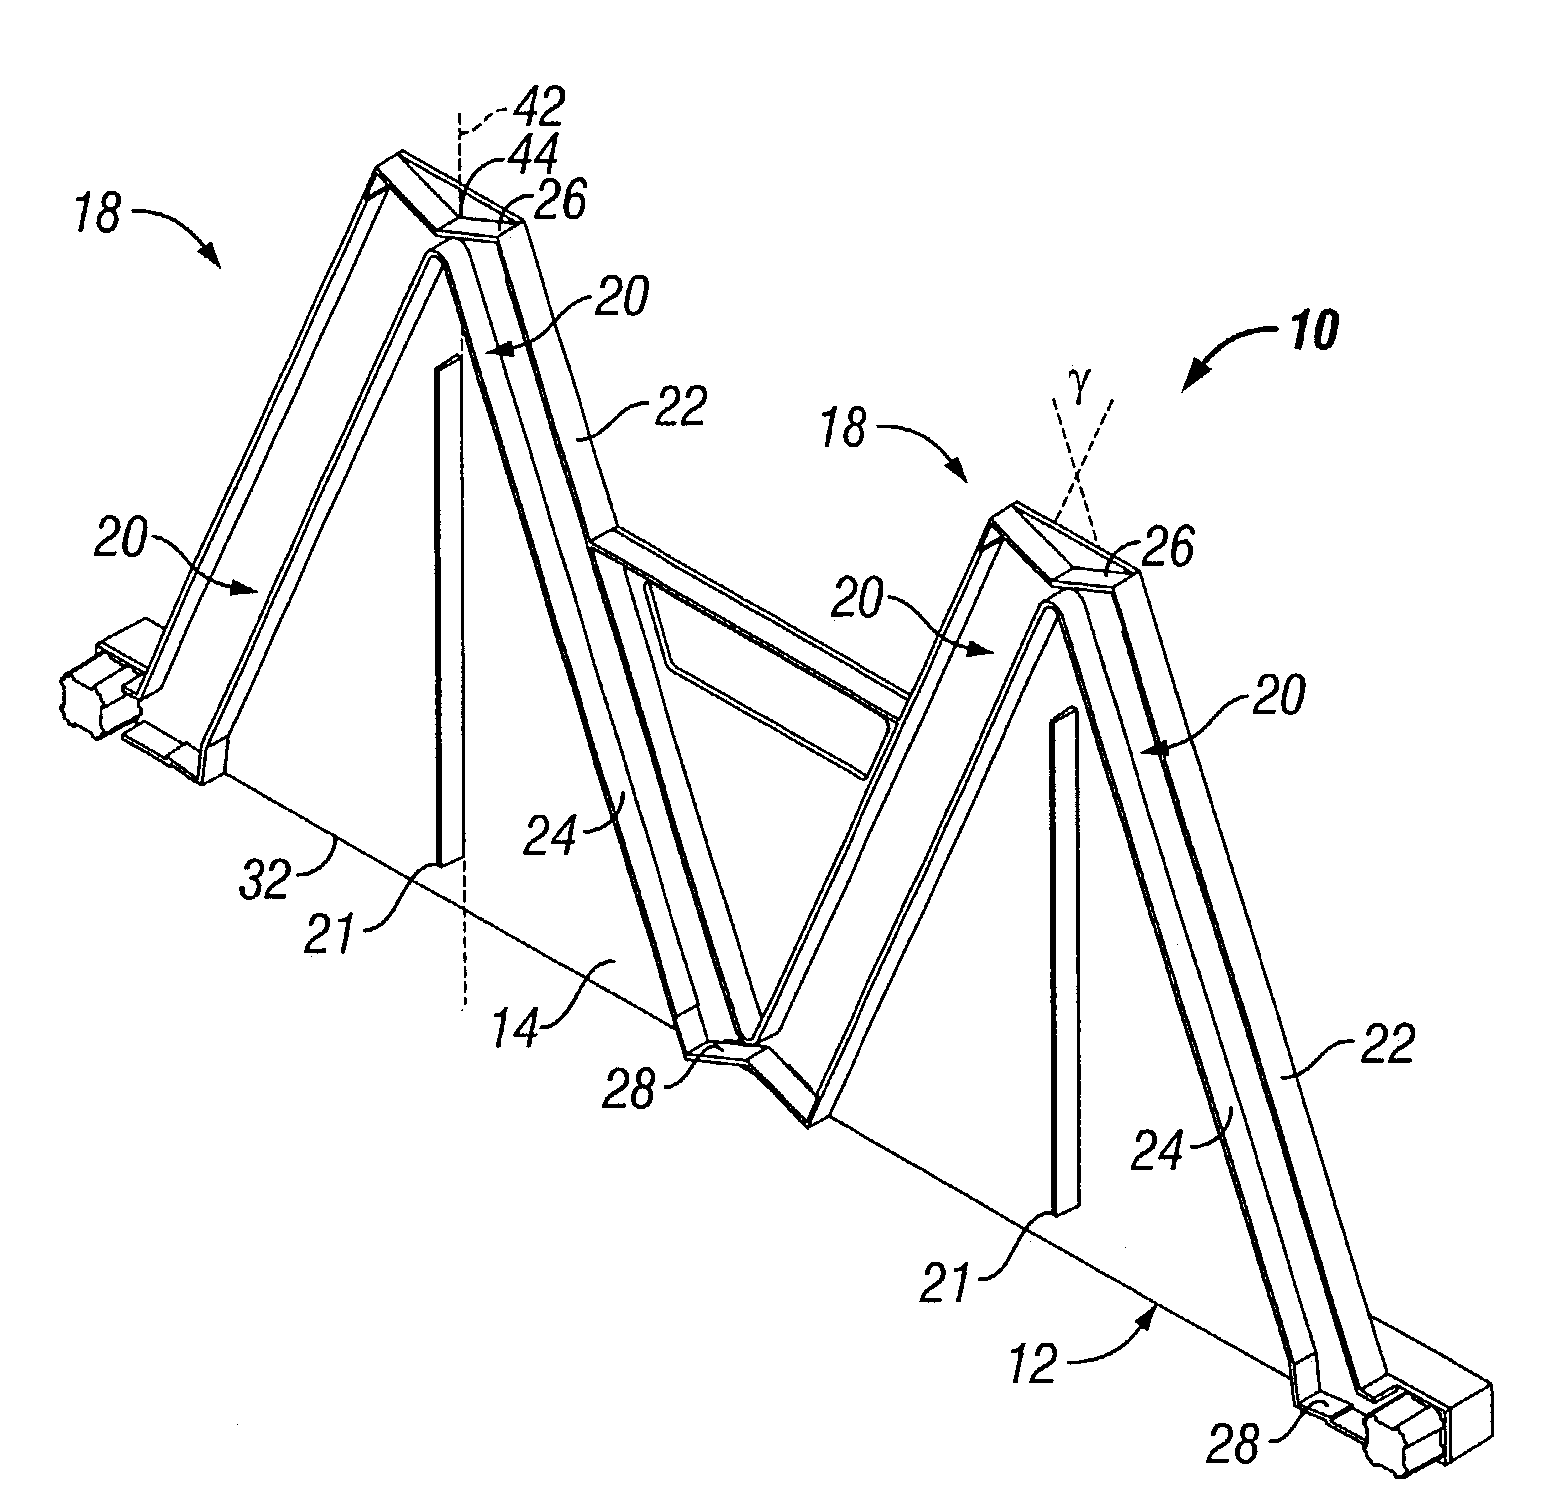 Filter frame and assembly